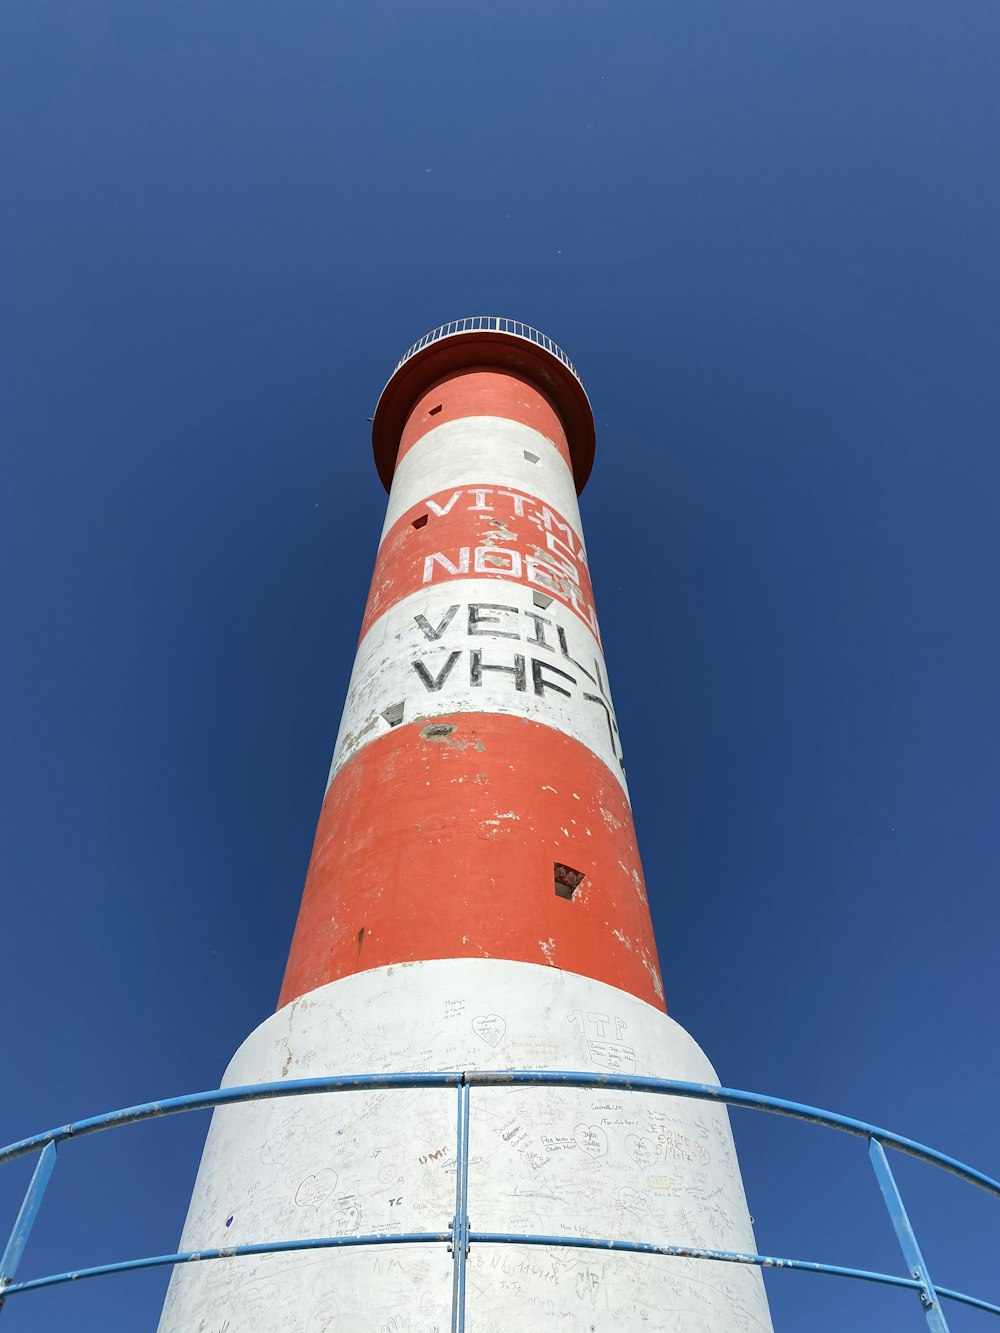 red and white concrete tower under blue sky during daytime